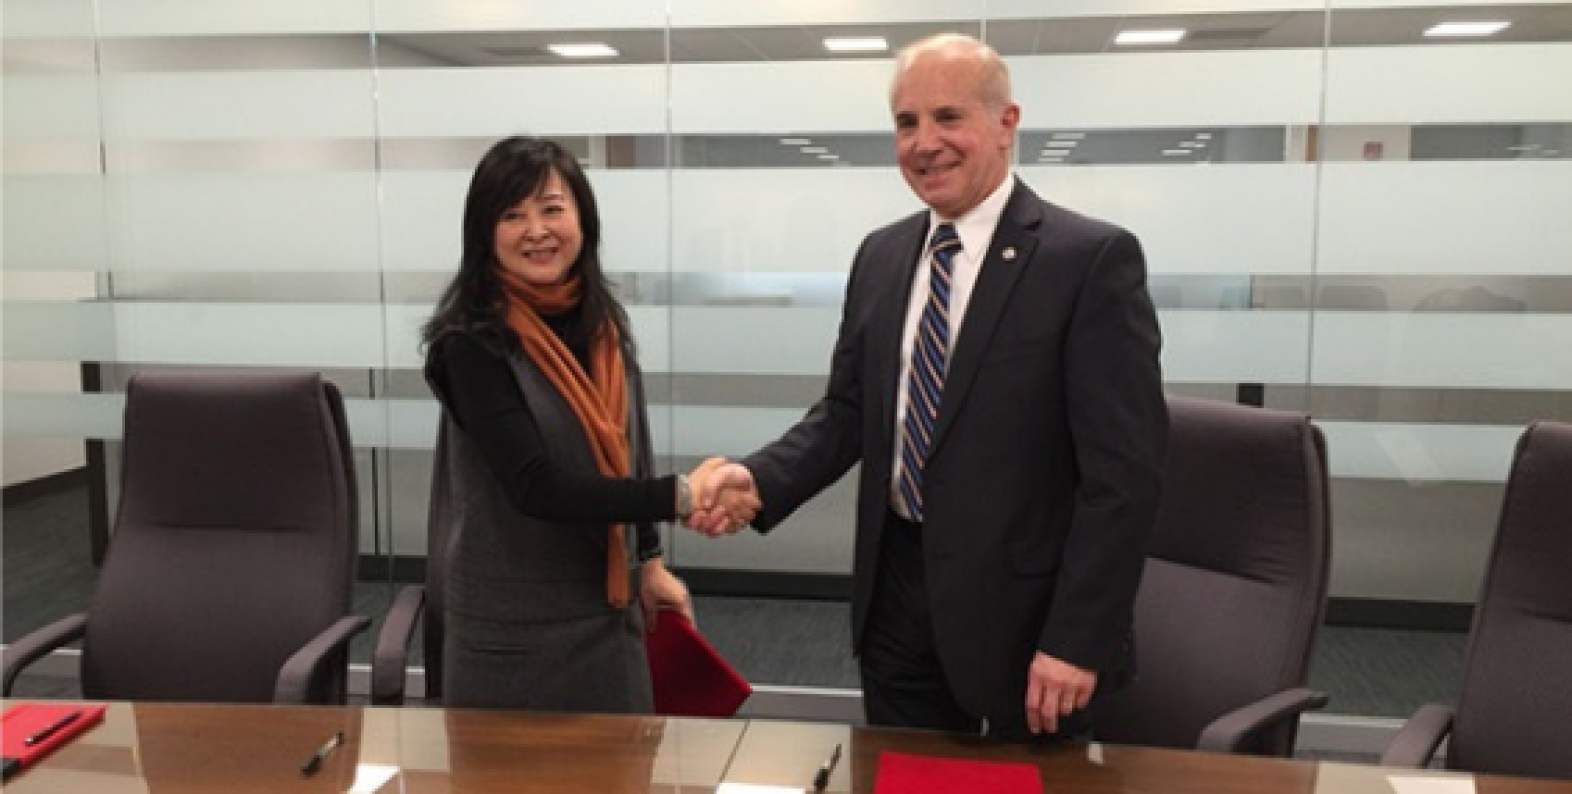 Partnership agreement signed with Chinese standards development organization